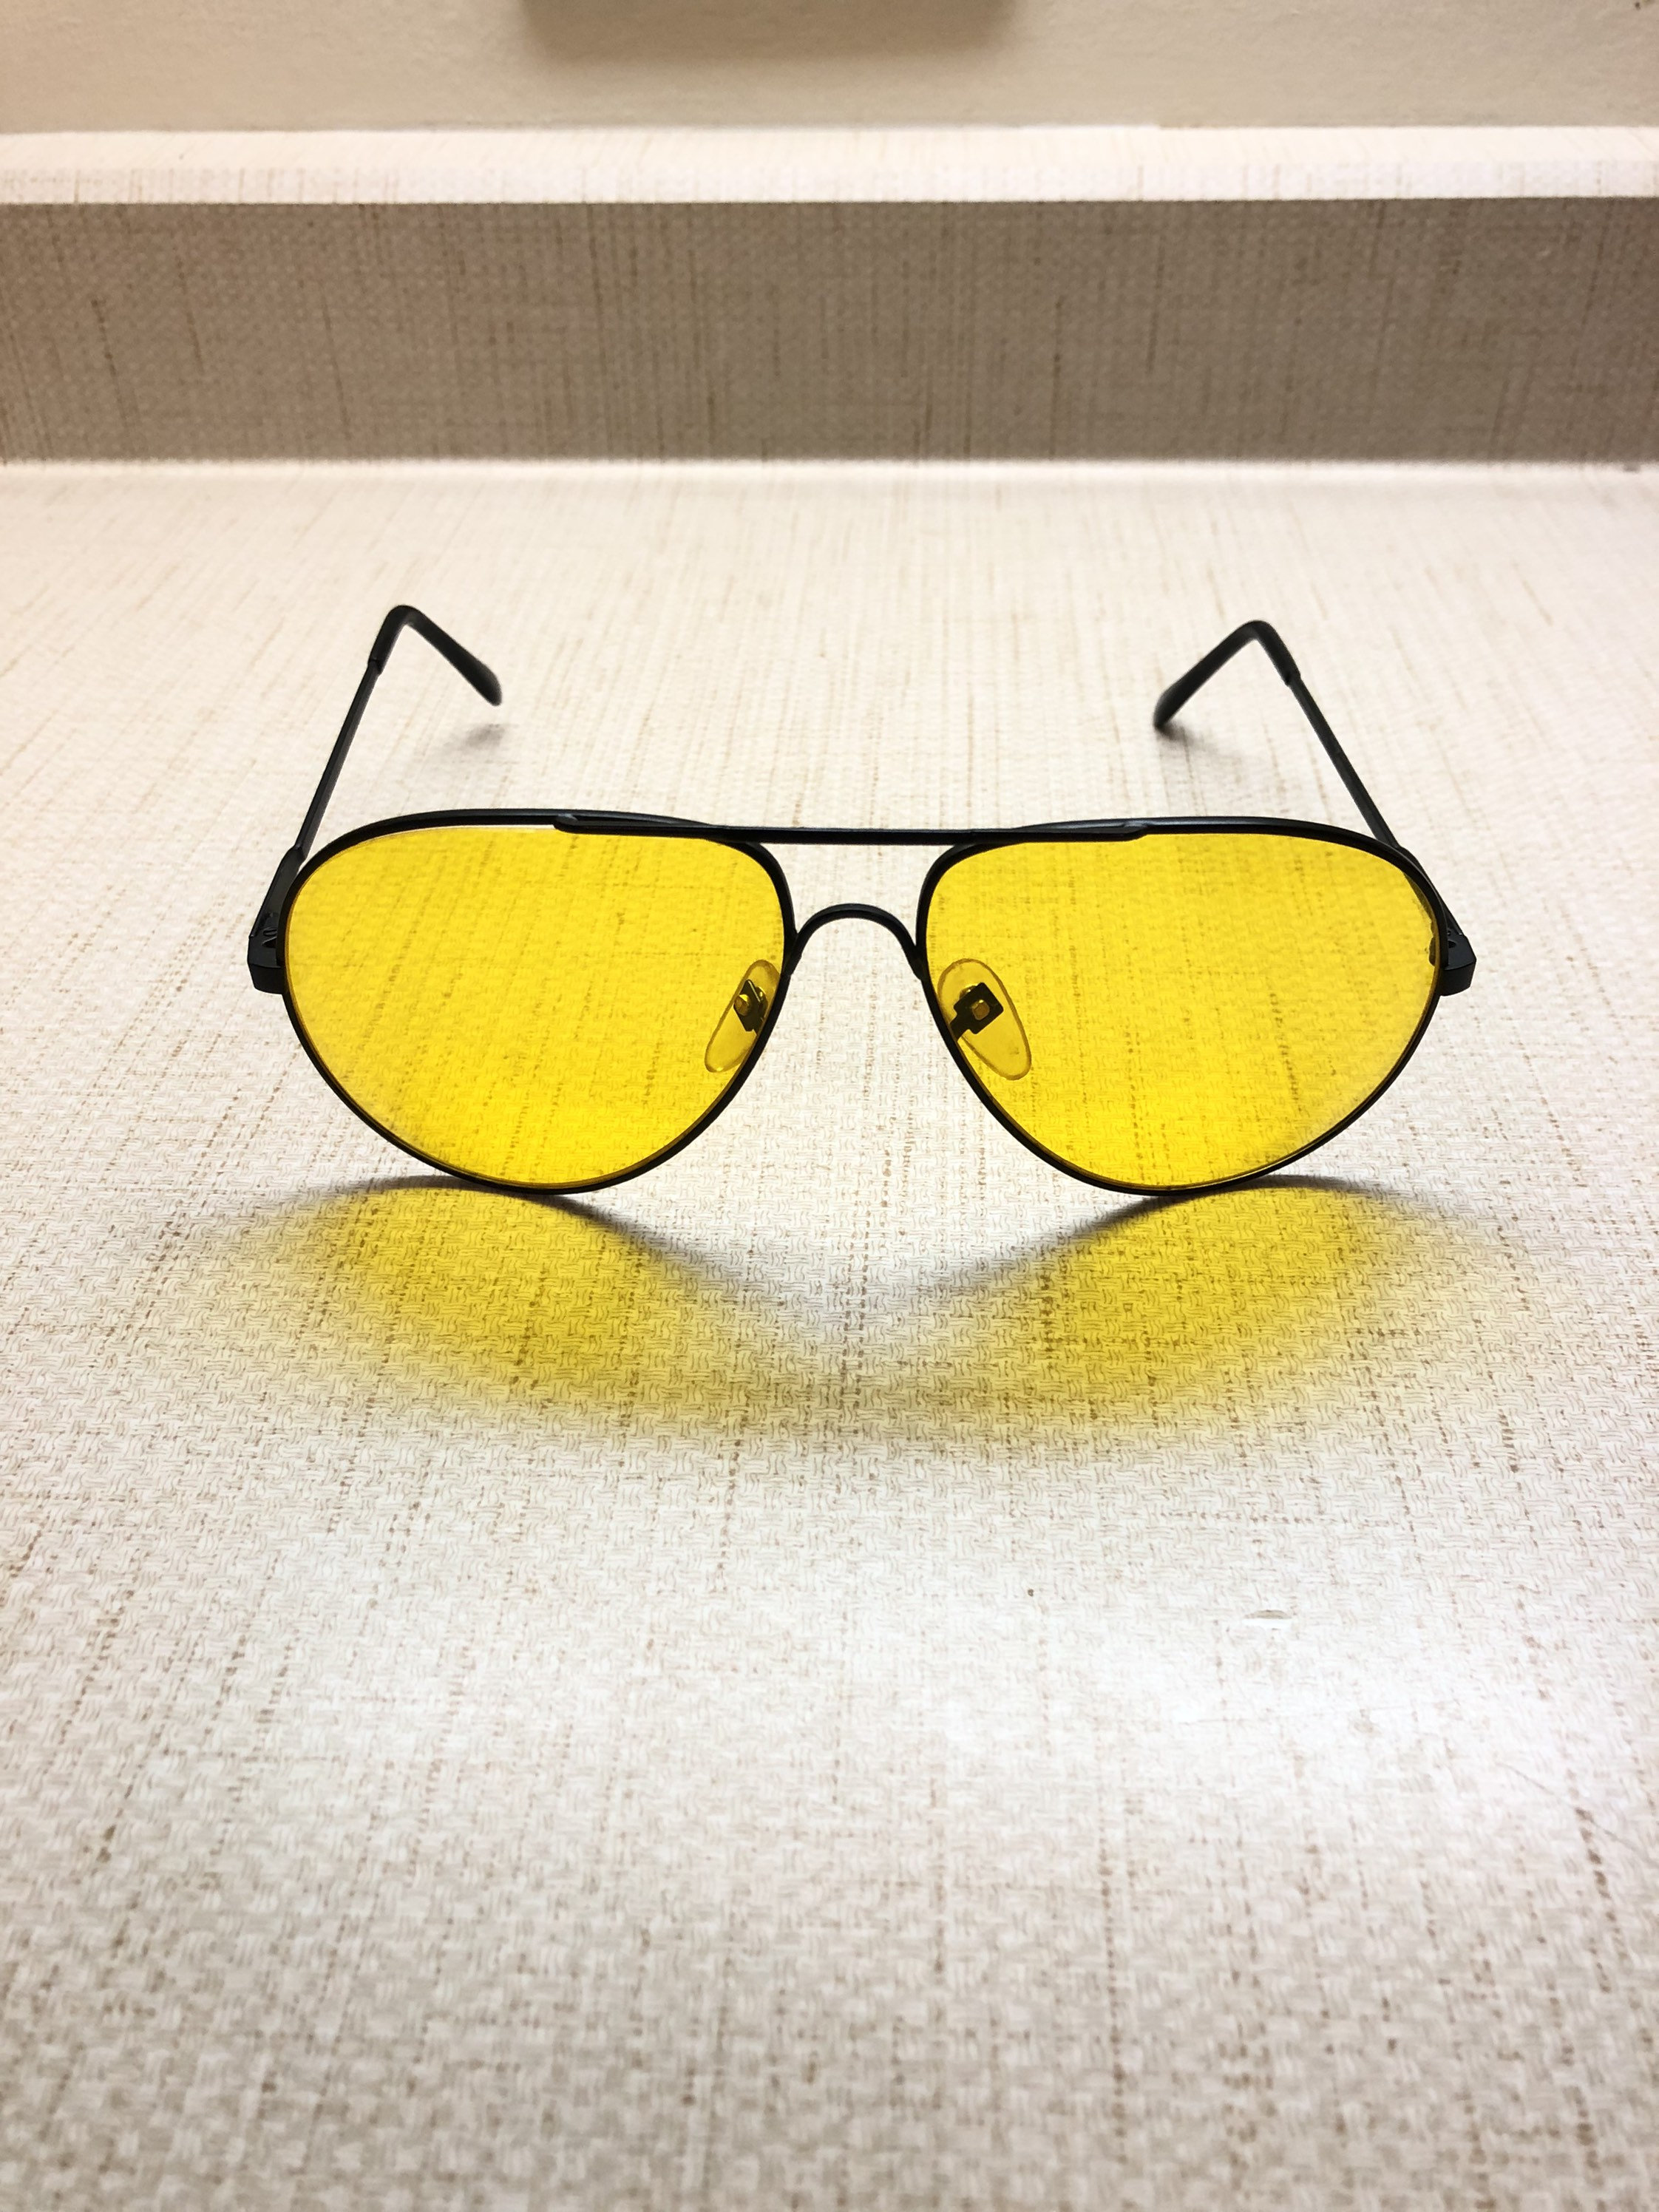 Why do many soldiers (and some civilian shooters) wear orange/yellow tinted  glasses? Is this just eye protection or are they also sunglasses? How does  the colored tint help? - Quora